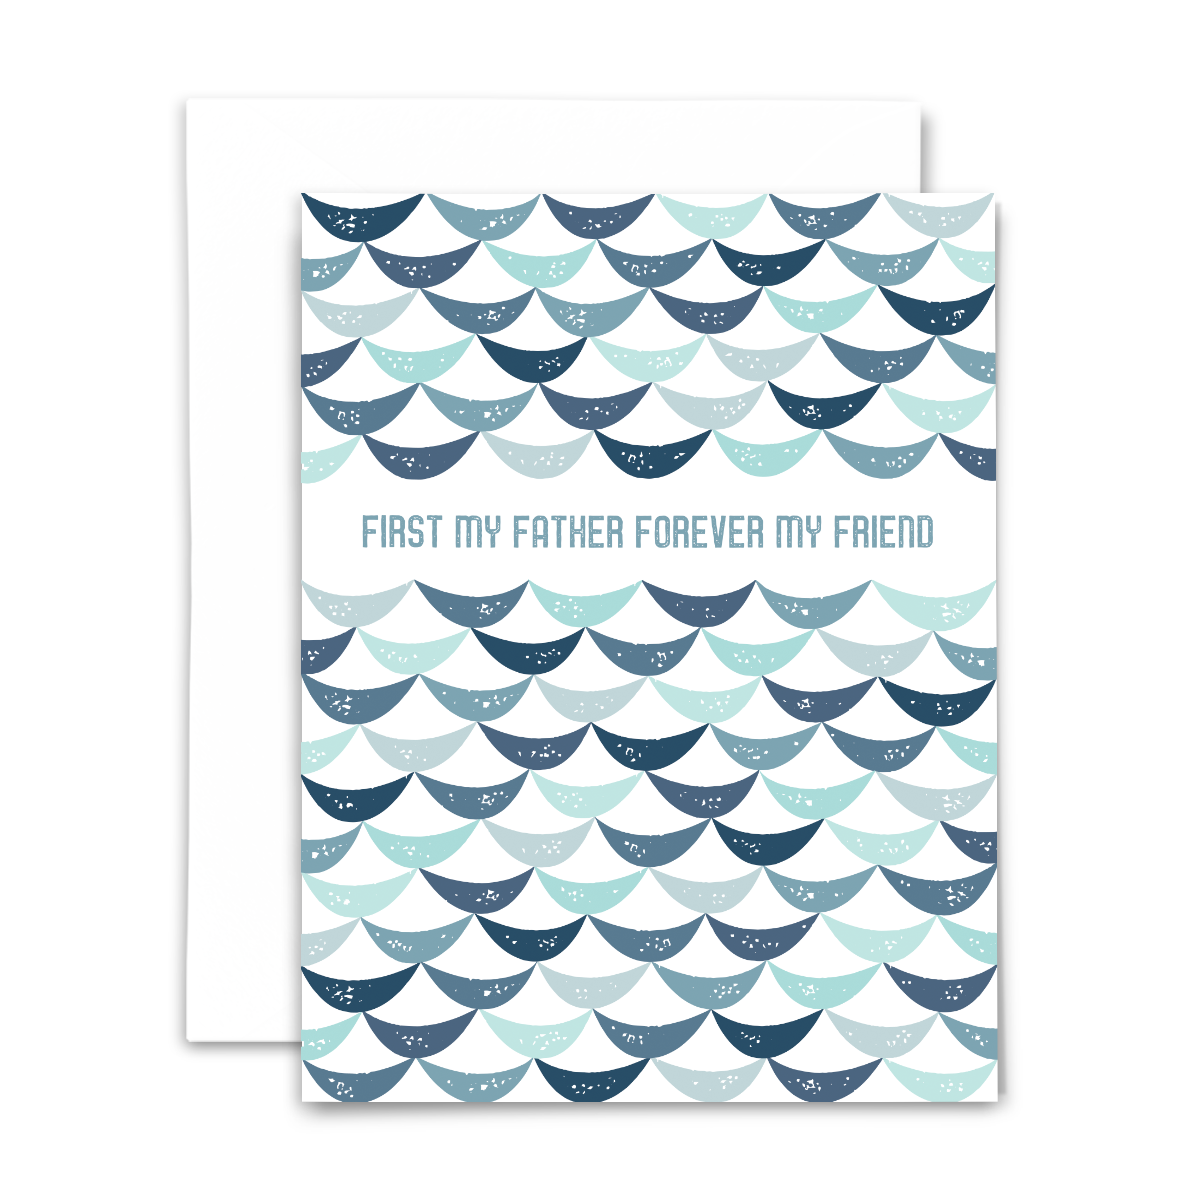 "First my father forever my friend" blank greeting card; blue font with light and dark blue arcs fan stack to fill front; with white envelope